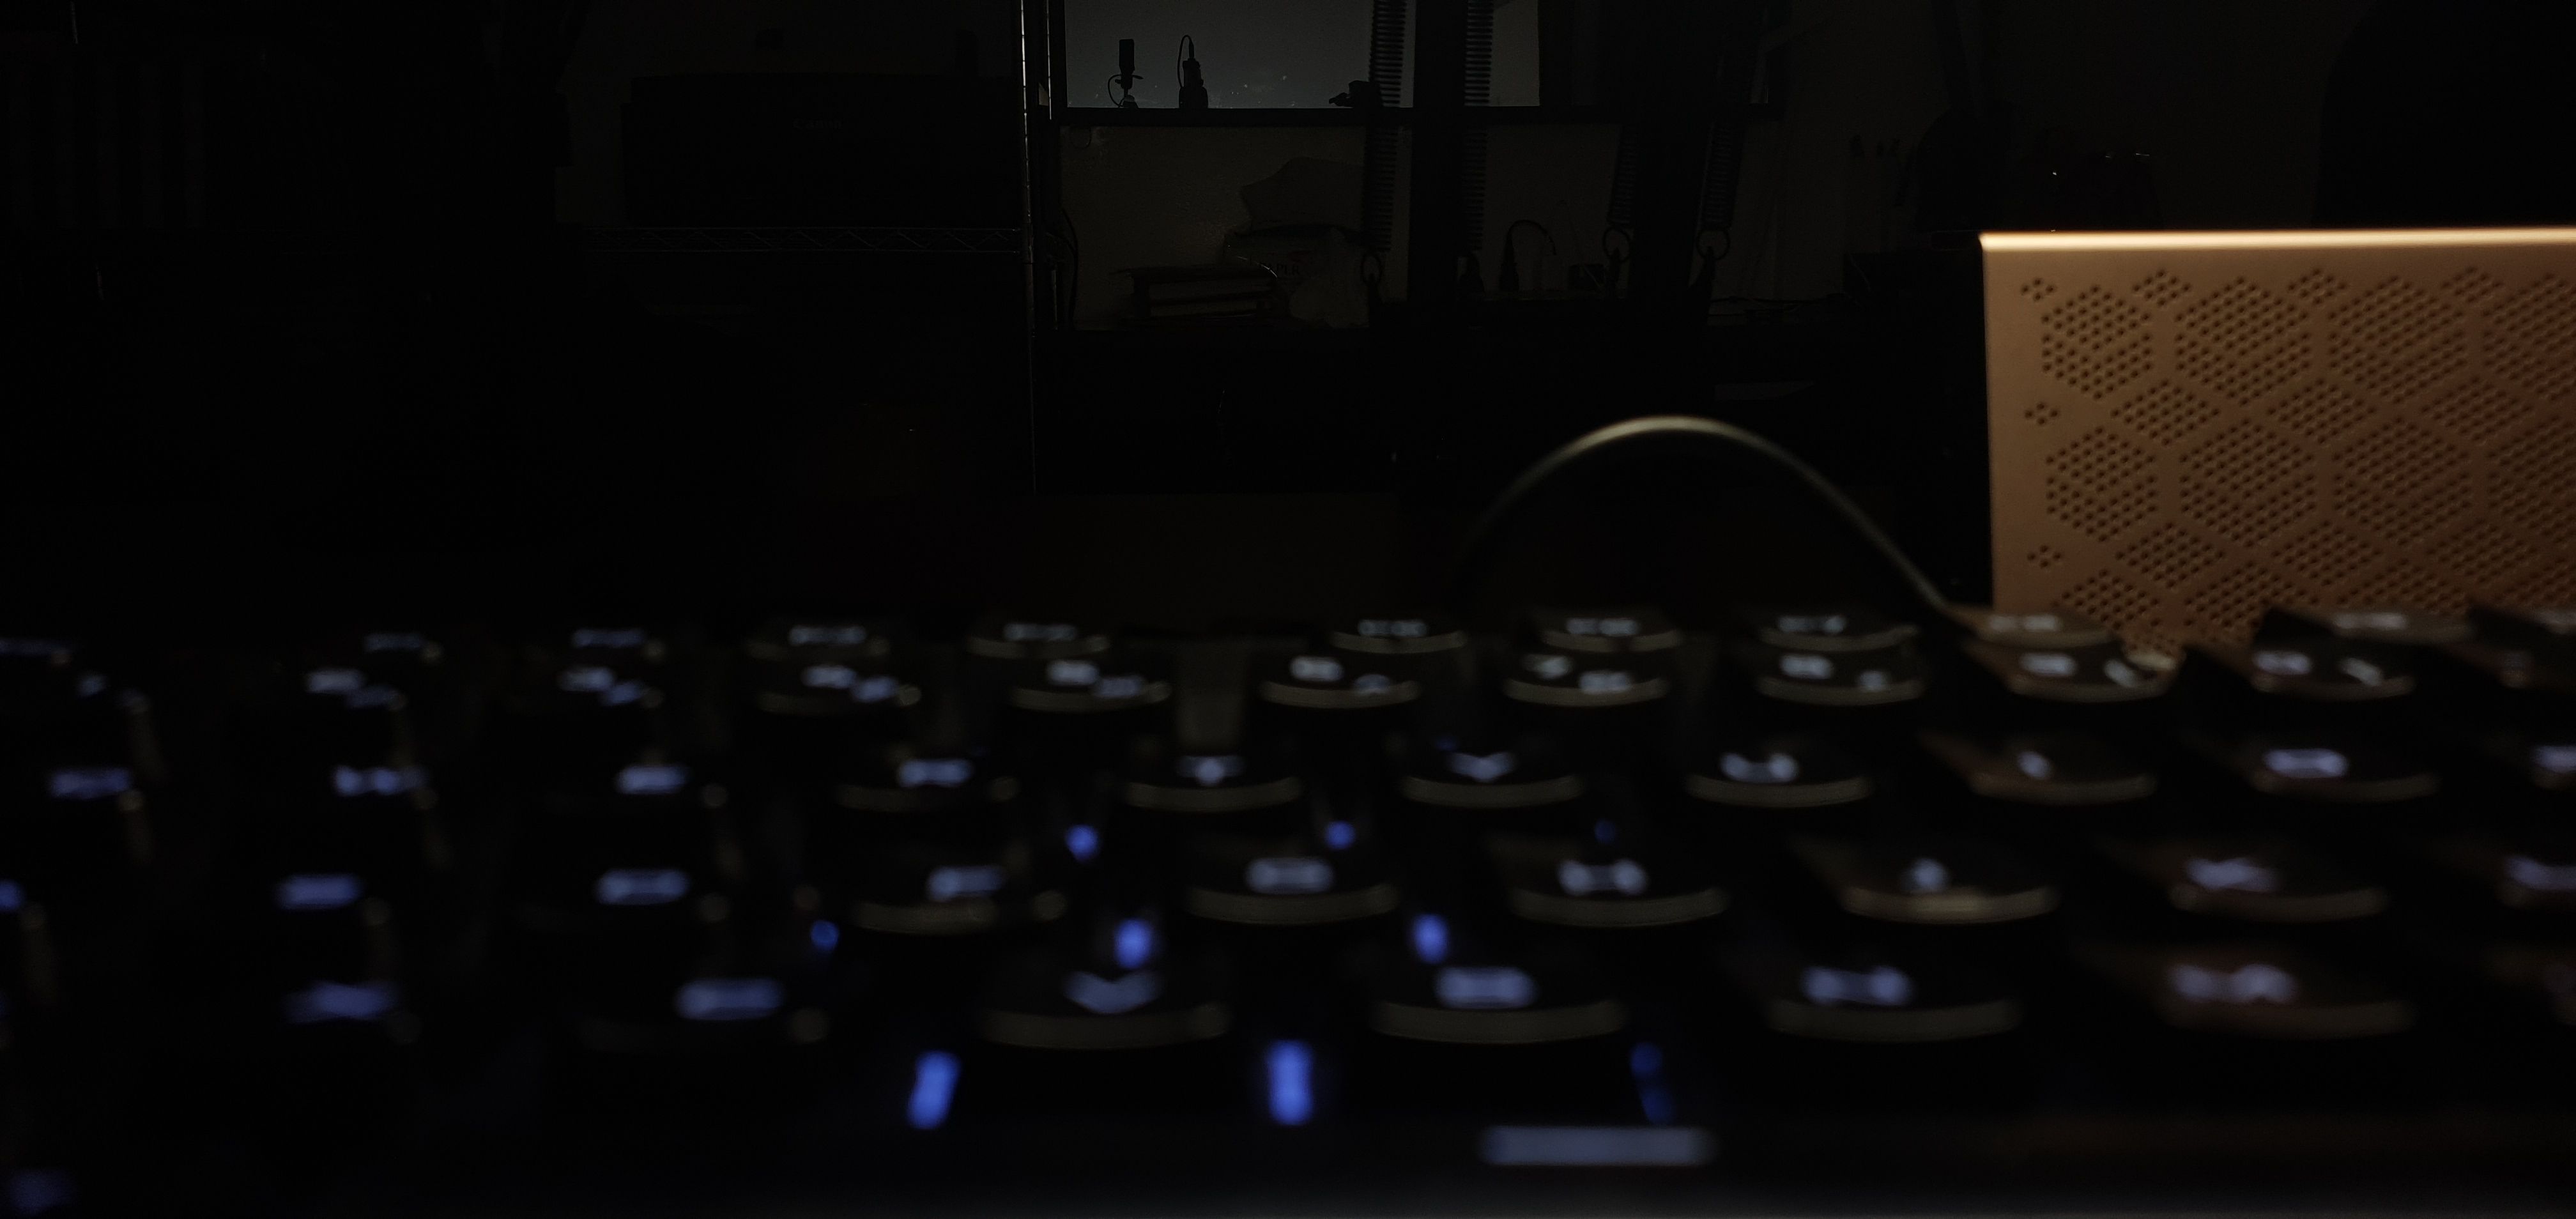 Dark, underexposed image of an office with a keyboard in the foreground